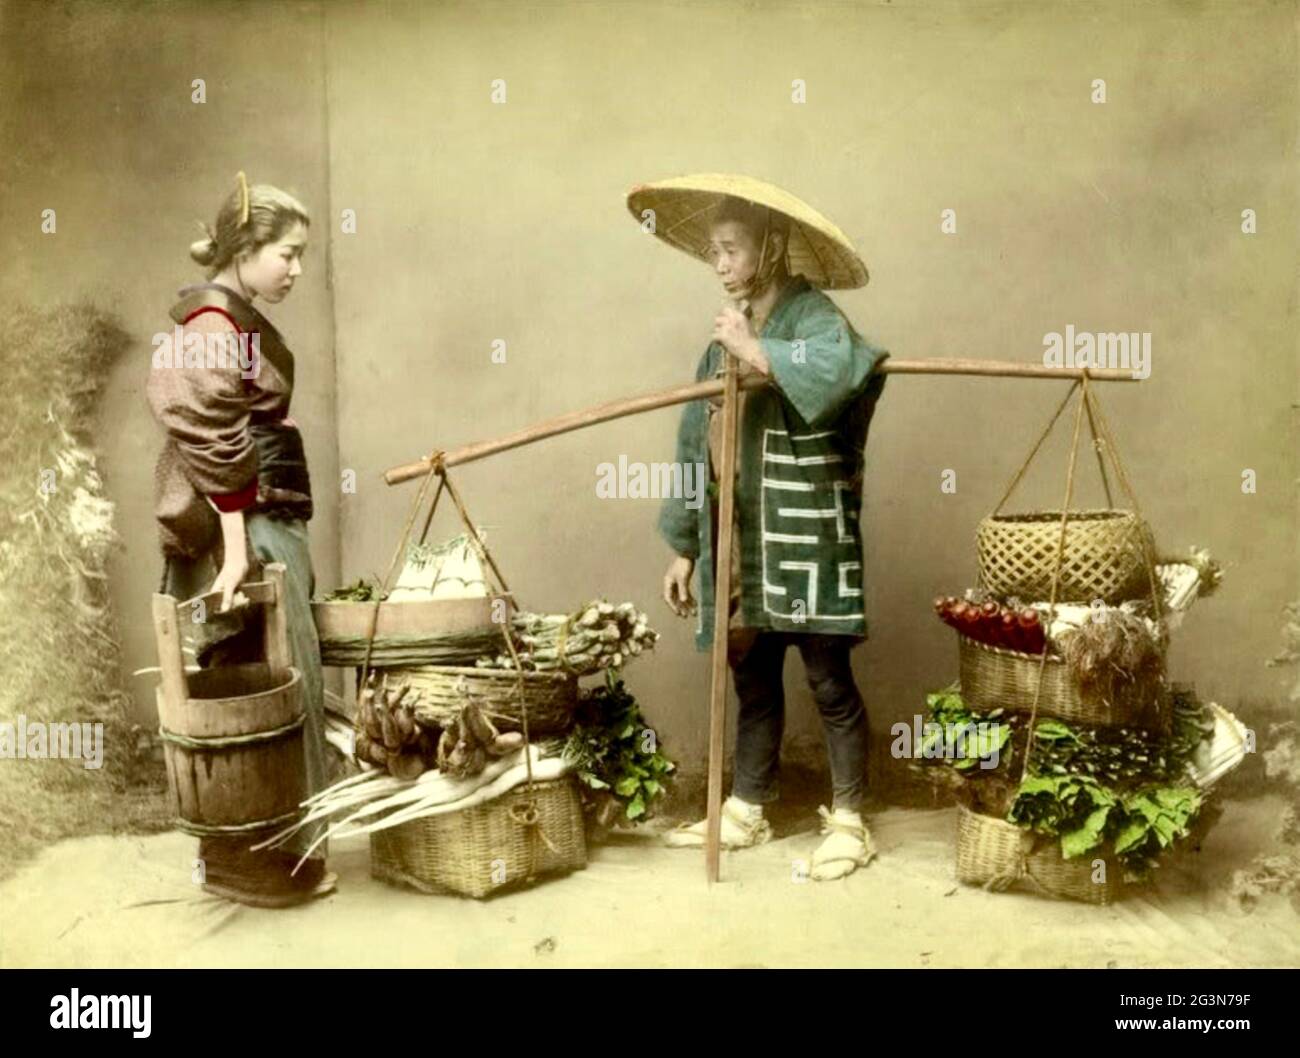 Vintage Kusakabe Kimbei photograph from Old Japan. A vegetable seller and customer in shopping experience. Stock Photo